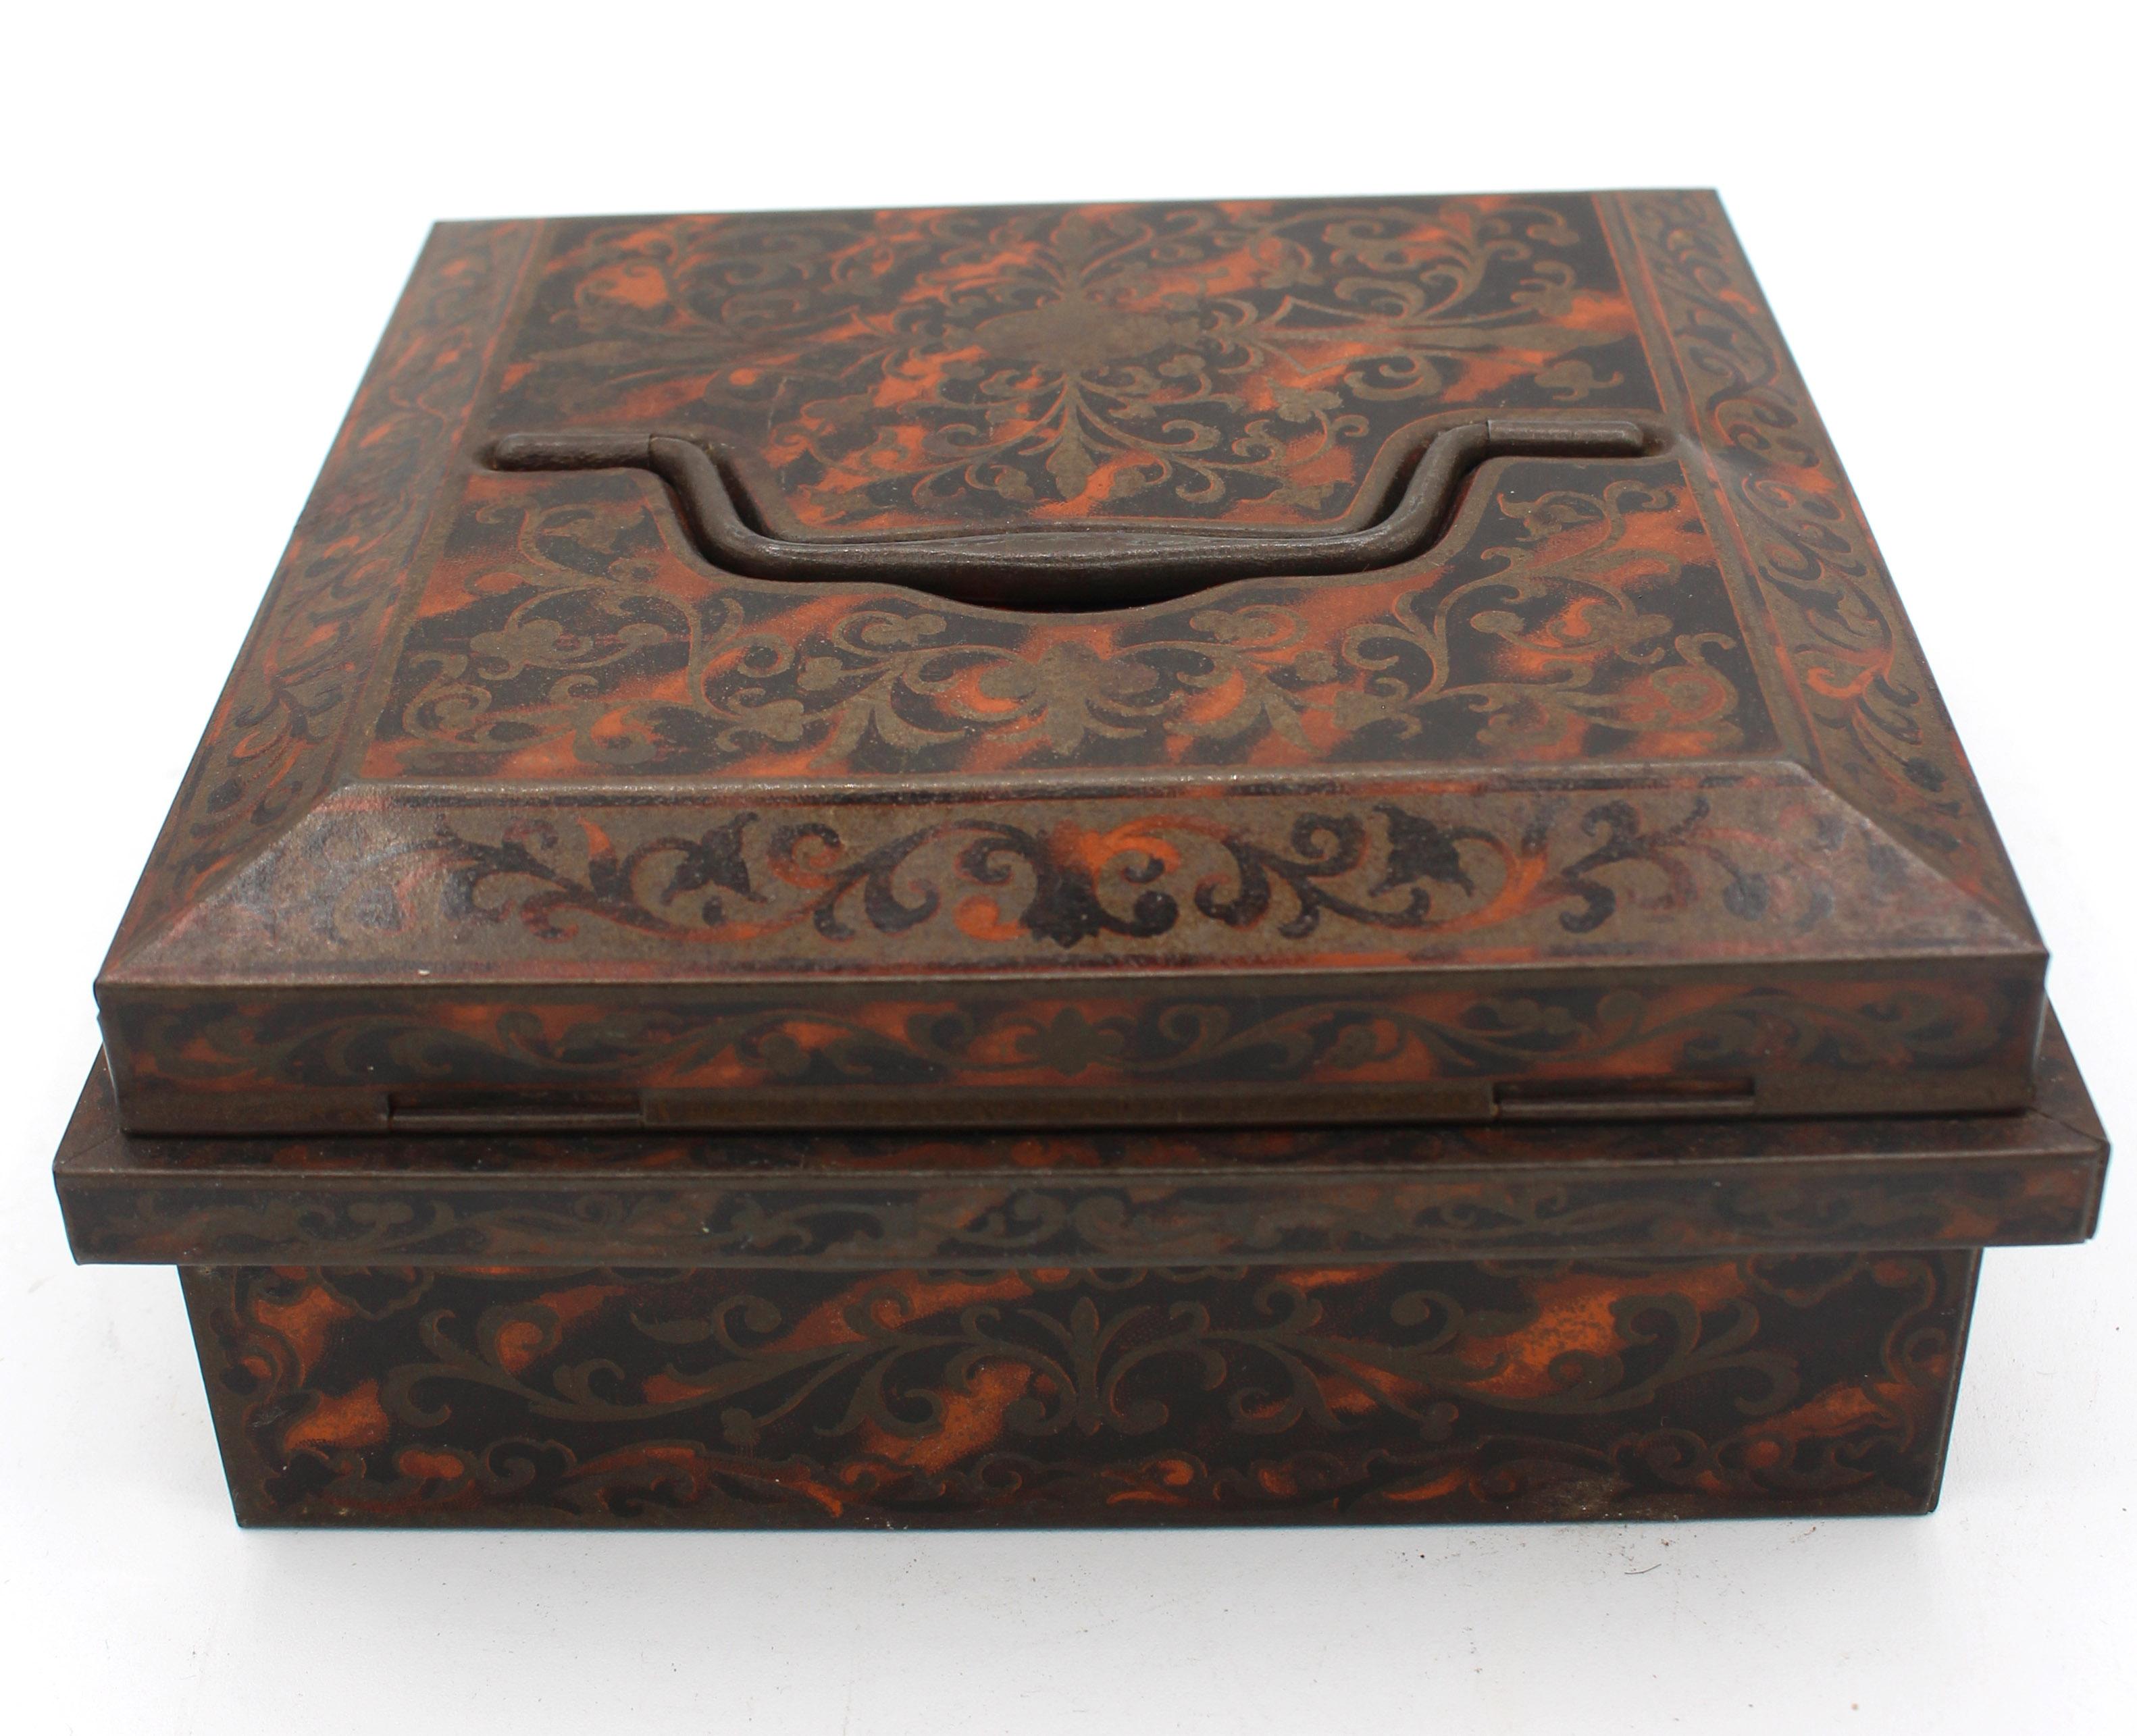 1904 Huntley & Palmers Faux Boulle Biscuit Tin Box In Good Condition For Sale In Chapel Hill, NC